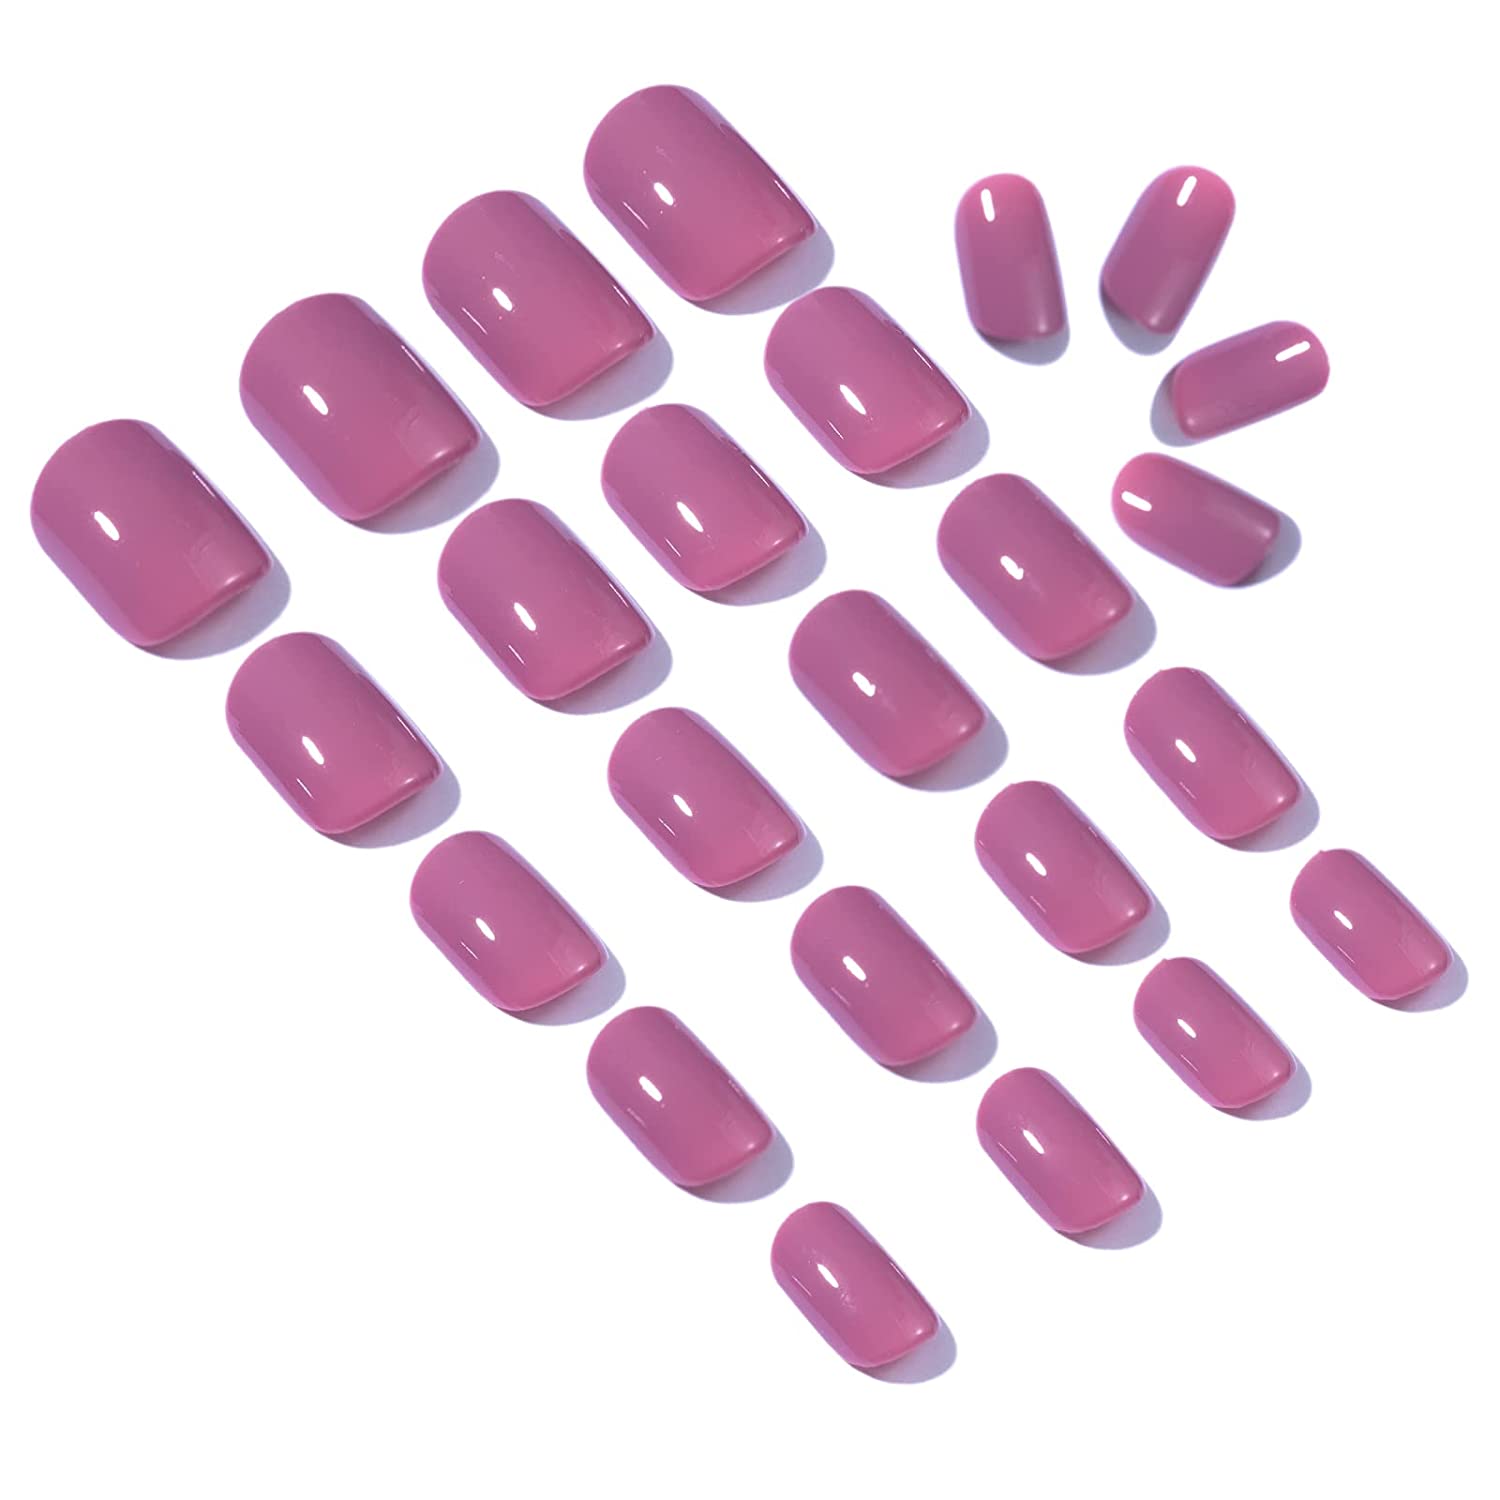 Short Press On Nails Glossy Fake Nails With Gel Finish For Women Solid Color 24pcs (LAVENDER) 24pcs